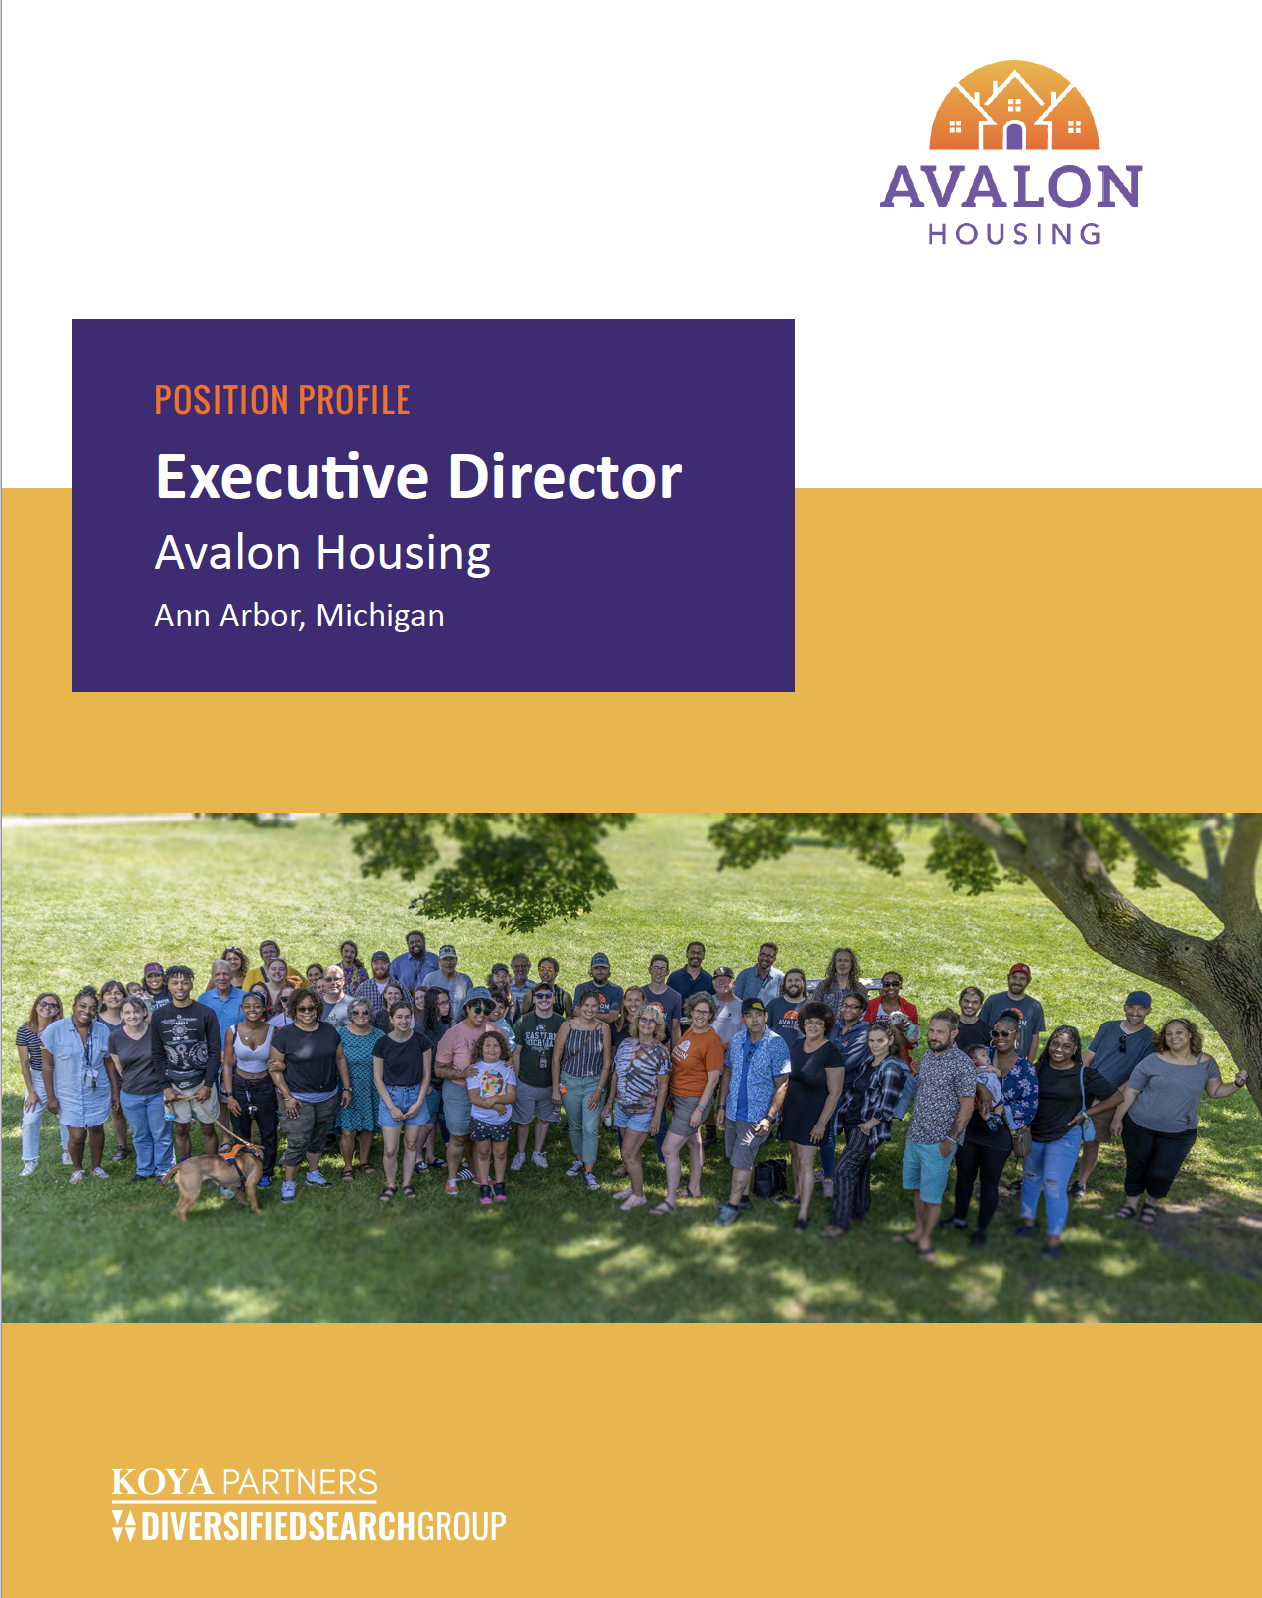 Cover image from Executive Position Profile, with a photo of a large group of Avalon staff underneath a tree.